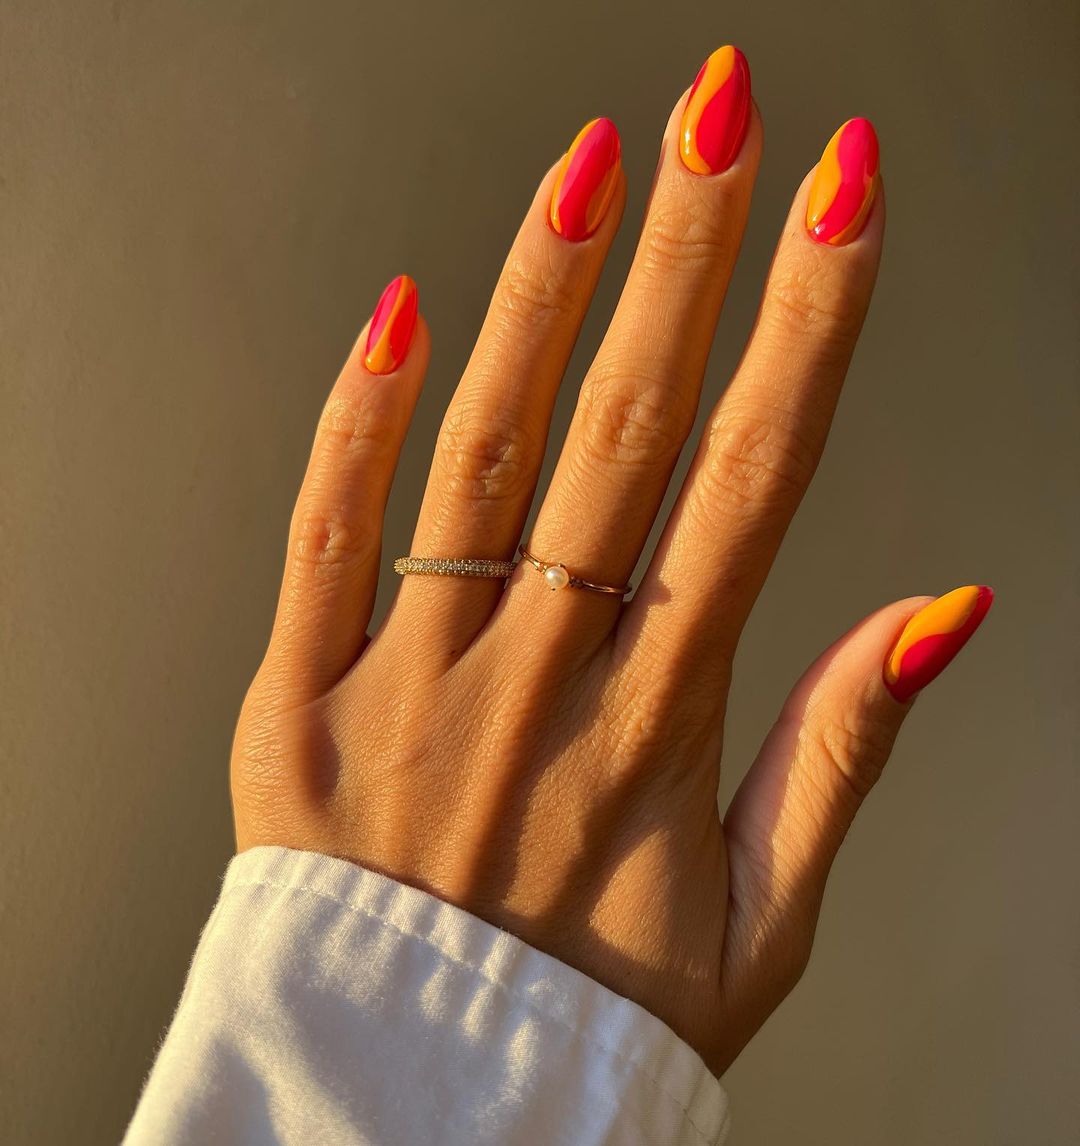 30 Best Fall Nail Colors and Manicure Ideas